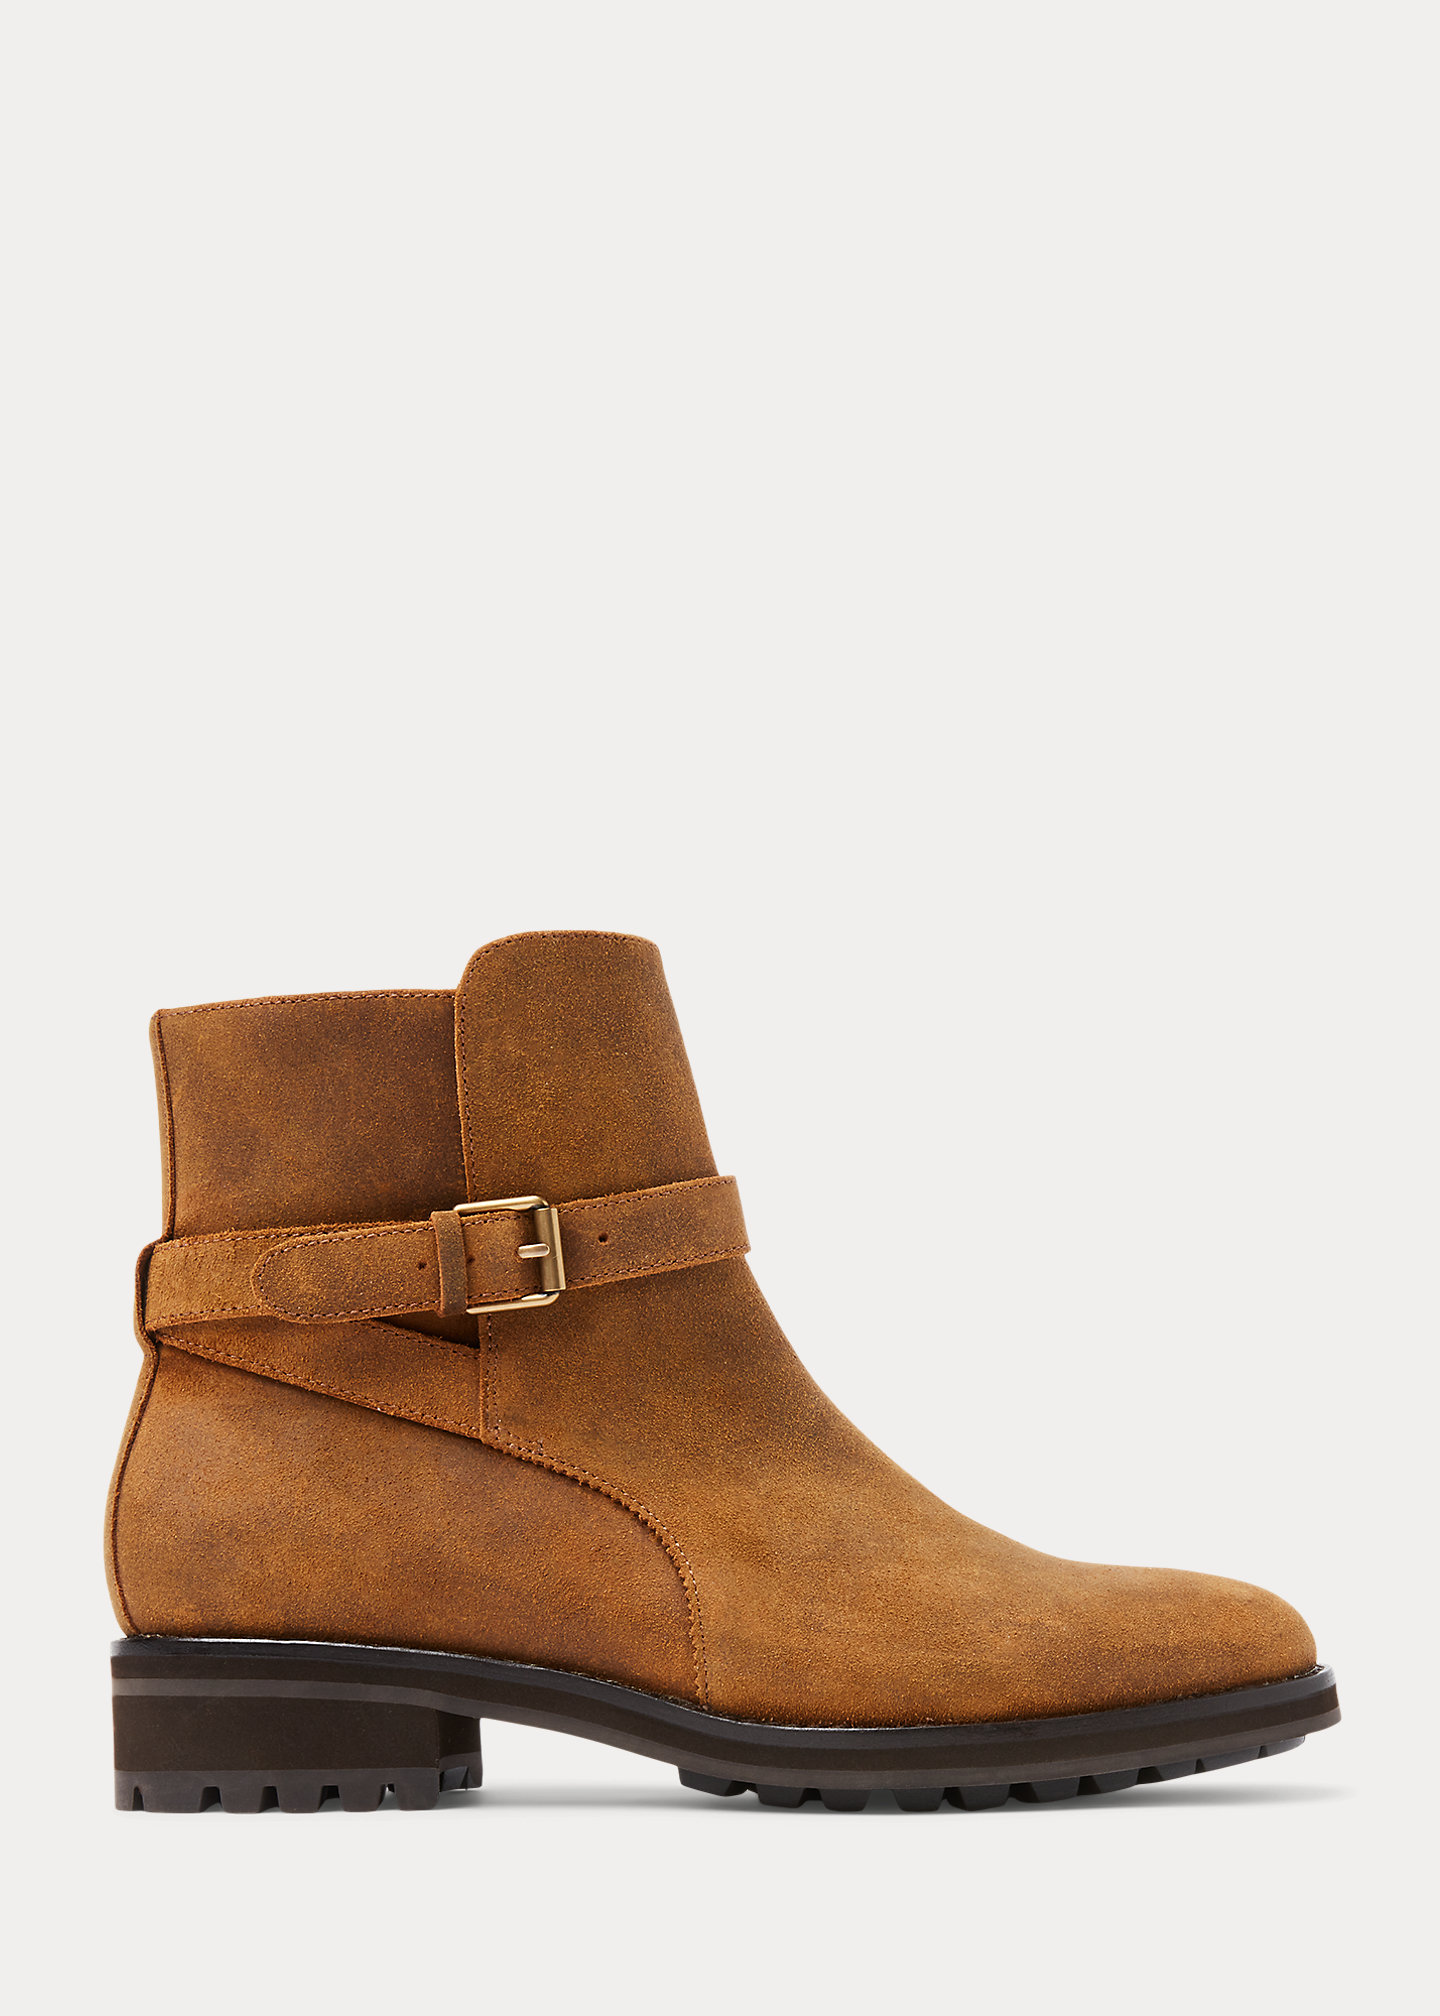 Bryson Waxed Suede Buckled Boot